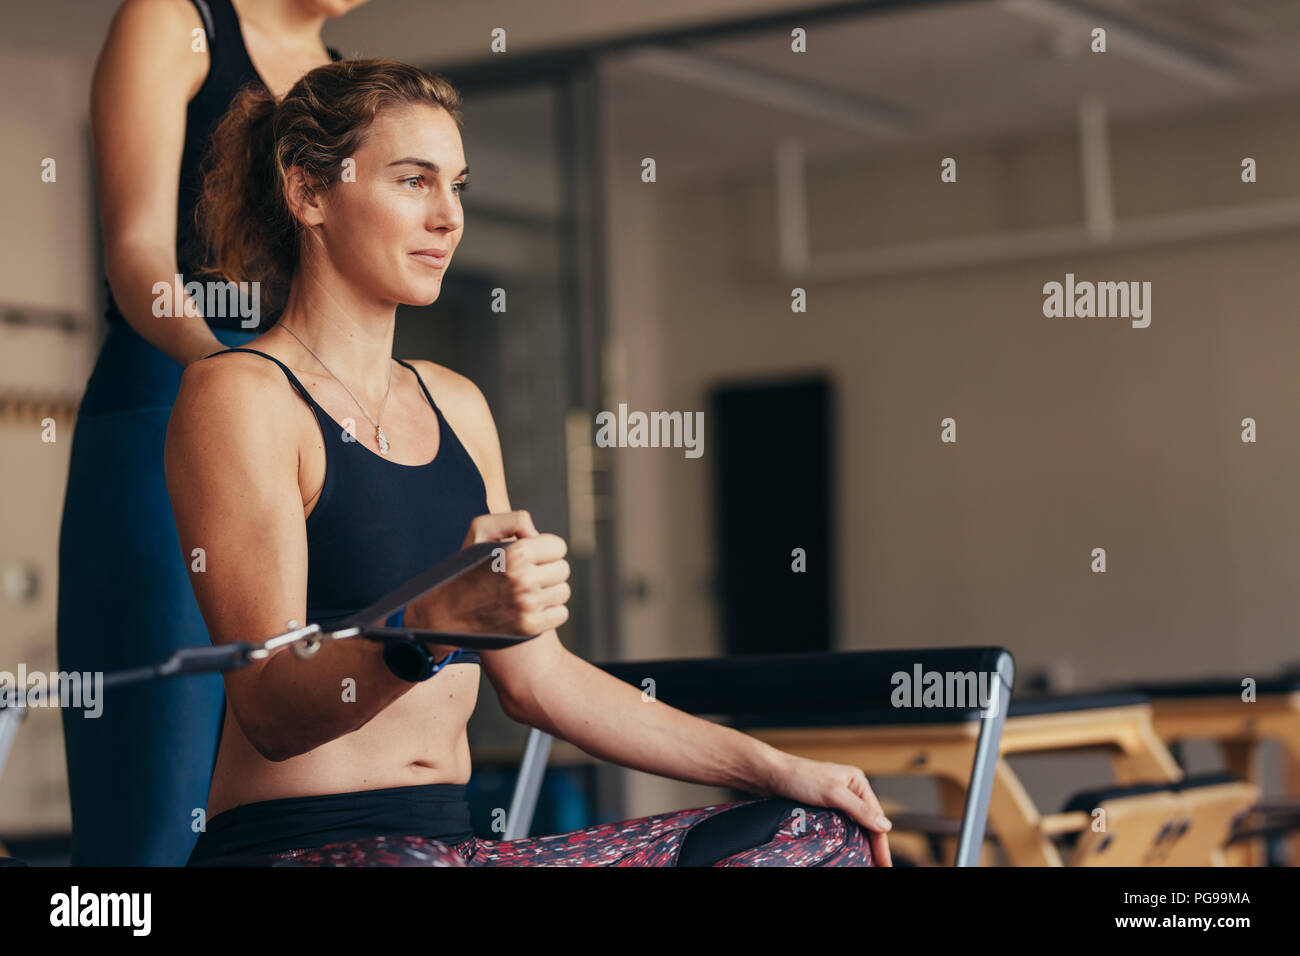 Woman sitting on a pilates training machine pulling stretch band with her hand. Stock Photo